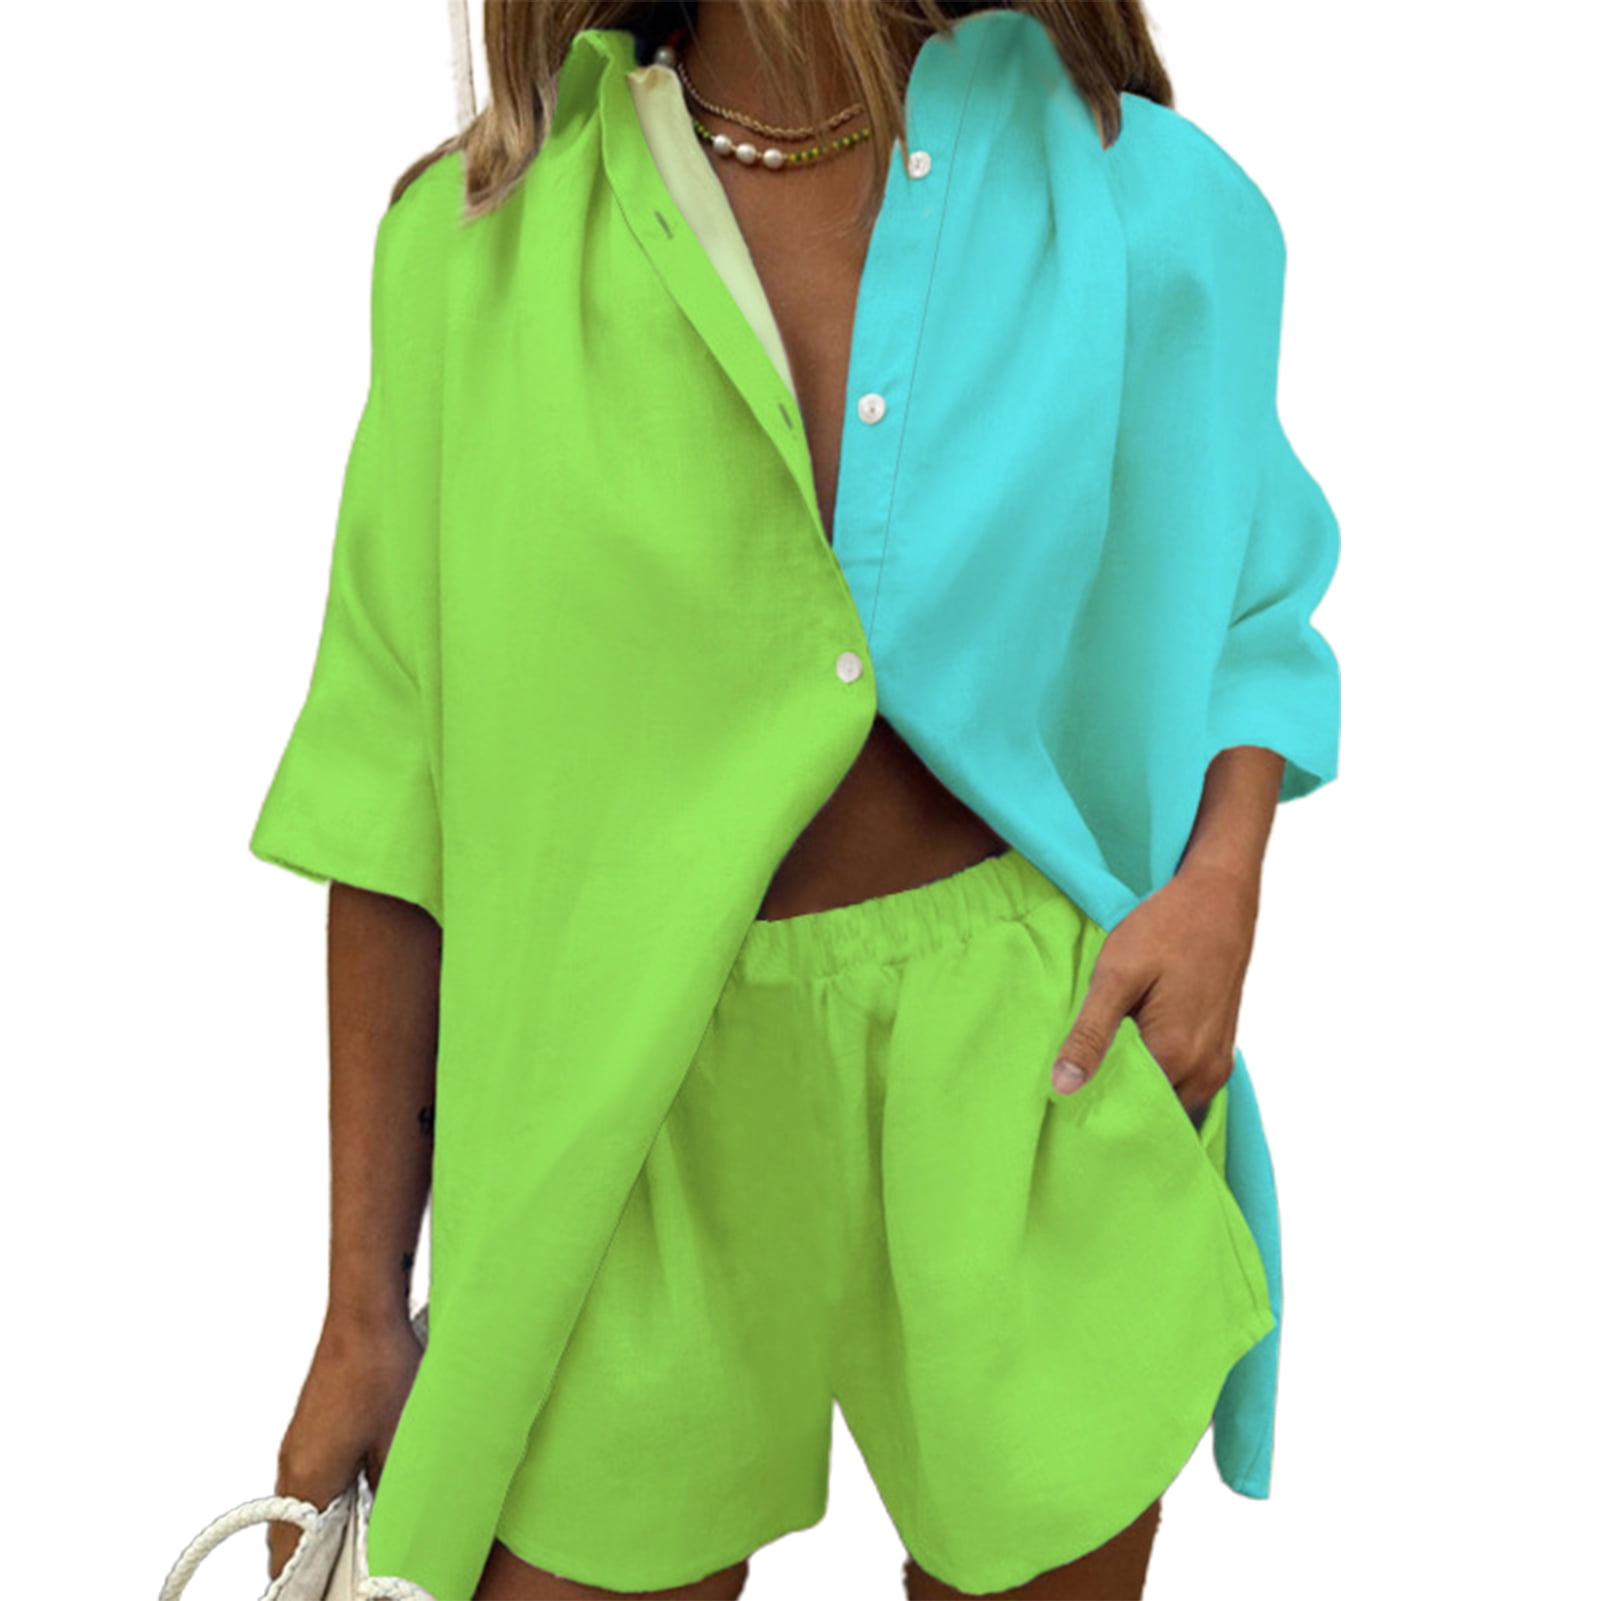 Women Shorts Set Wear Single-breasted Shirt for Leg Polyester Summer Daily Wide Color Outfit Green 1 Loose Block HEVIRGO